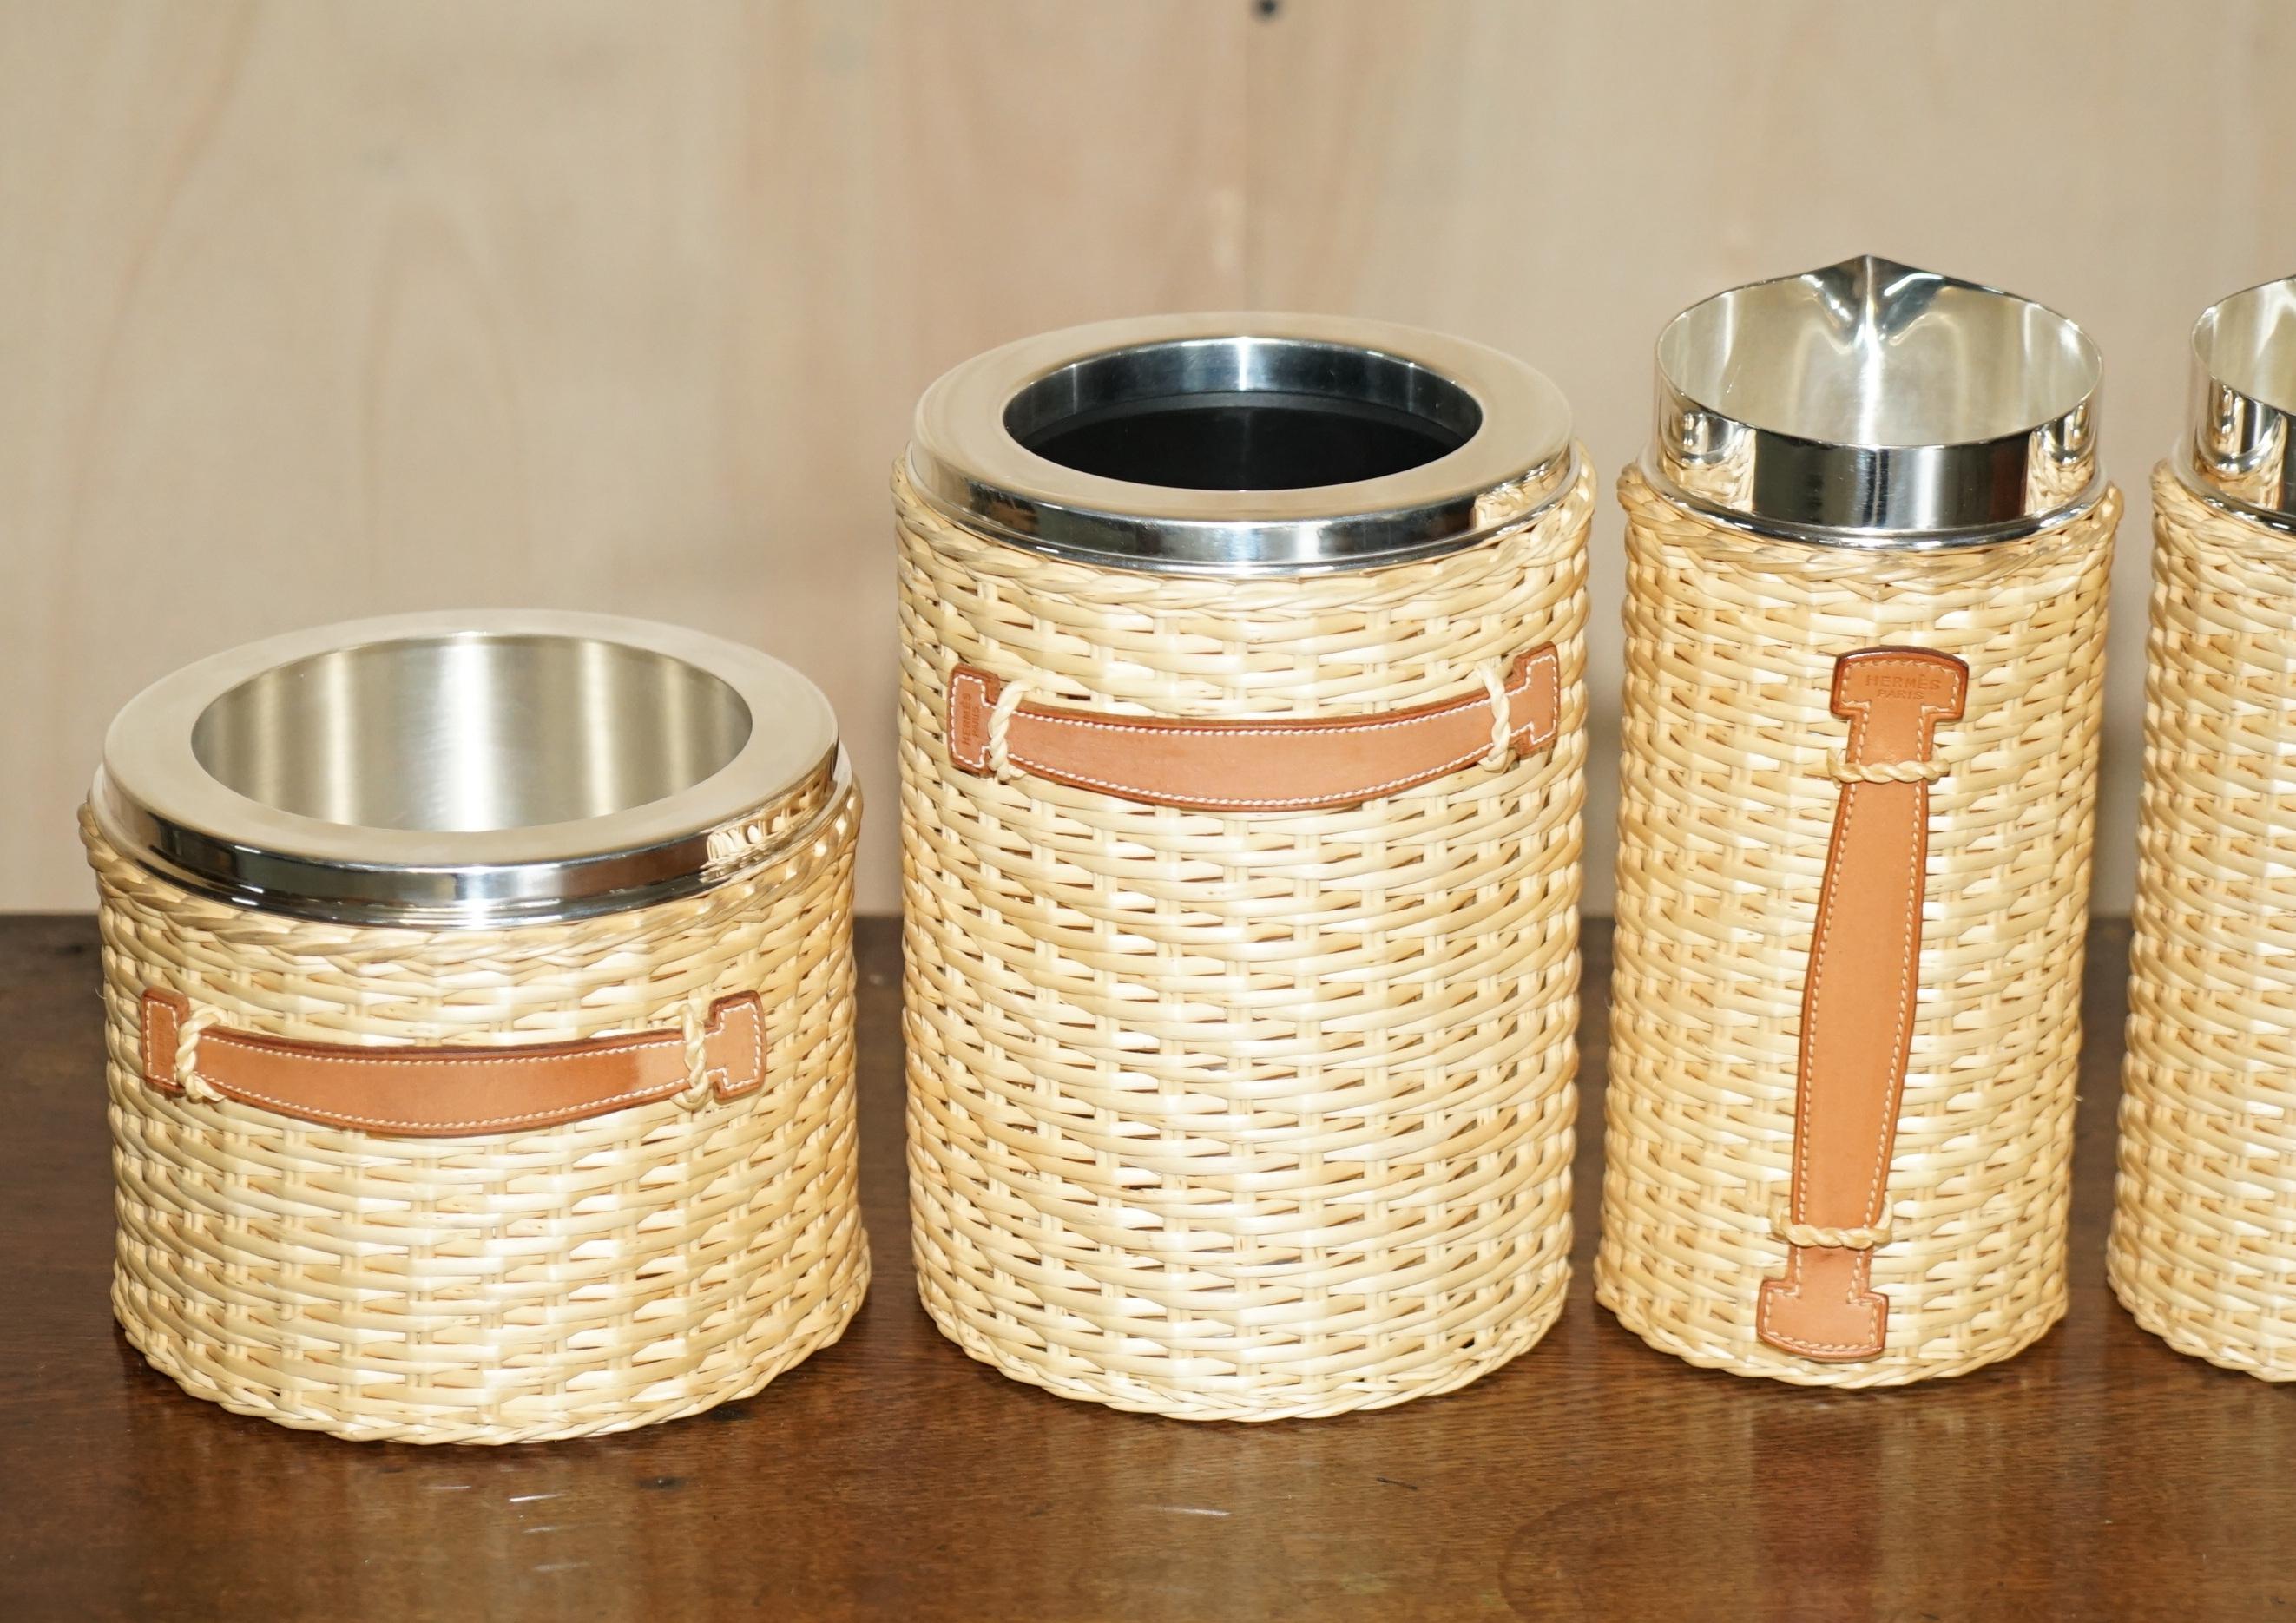 We are delighted to offer for sale this once in a lifetime opportunity to own this custom made suite of Hermes Paris “Farming” picnic equipment, Barenia Edition to include a pair of Wine Coolers, a pair of Champagne Buckets and a pair of Pitcher